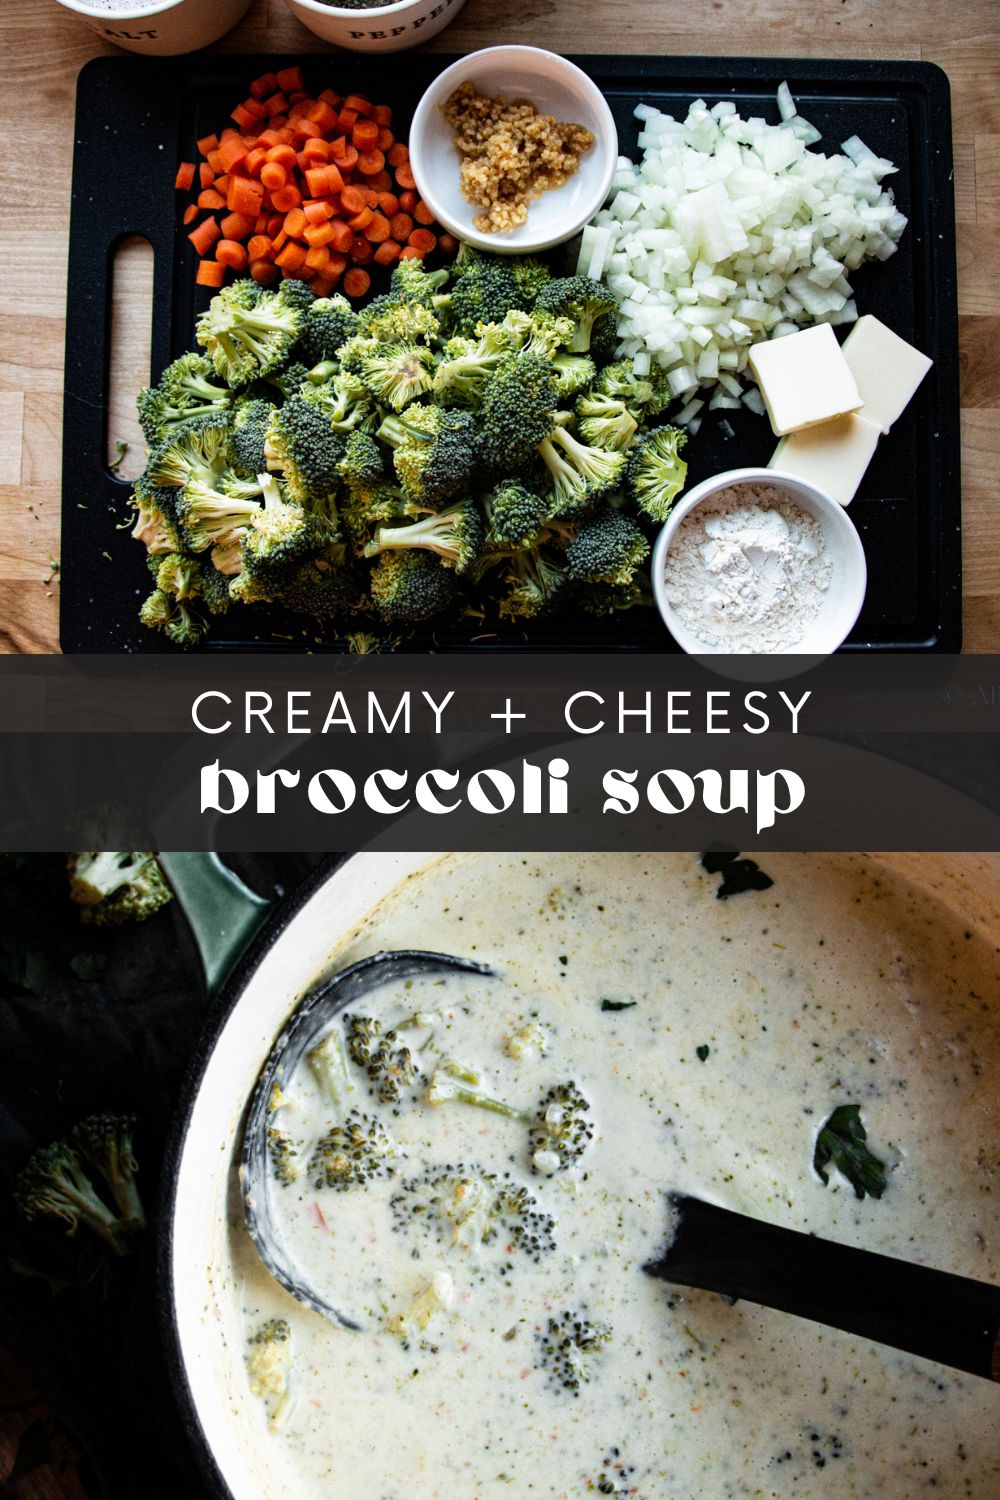 A real warming classic, this broccoli cheddar soup is the best comfort food! With its irresistible combination of savory cheddar cheese and tender broccoli - cheddar broccoli soup is the perfect mix of cheesy goodness and a hearty veggie meal. 